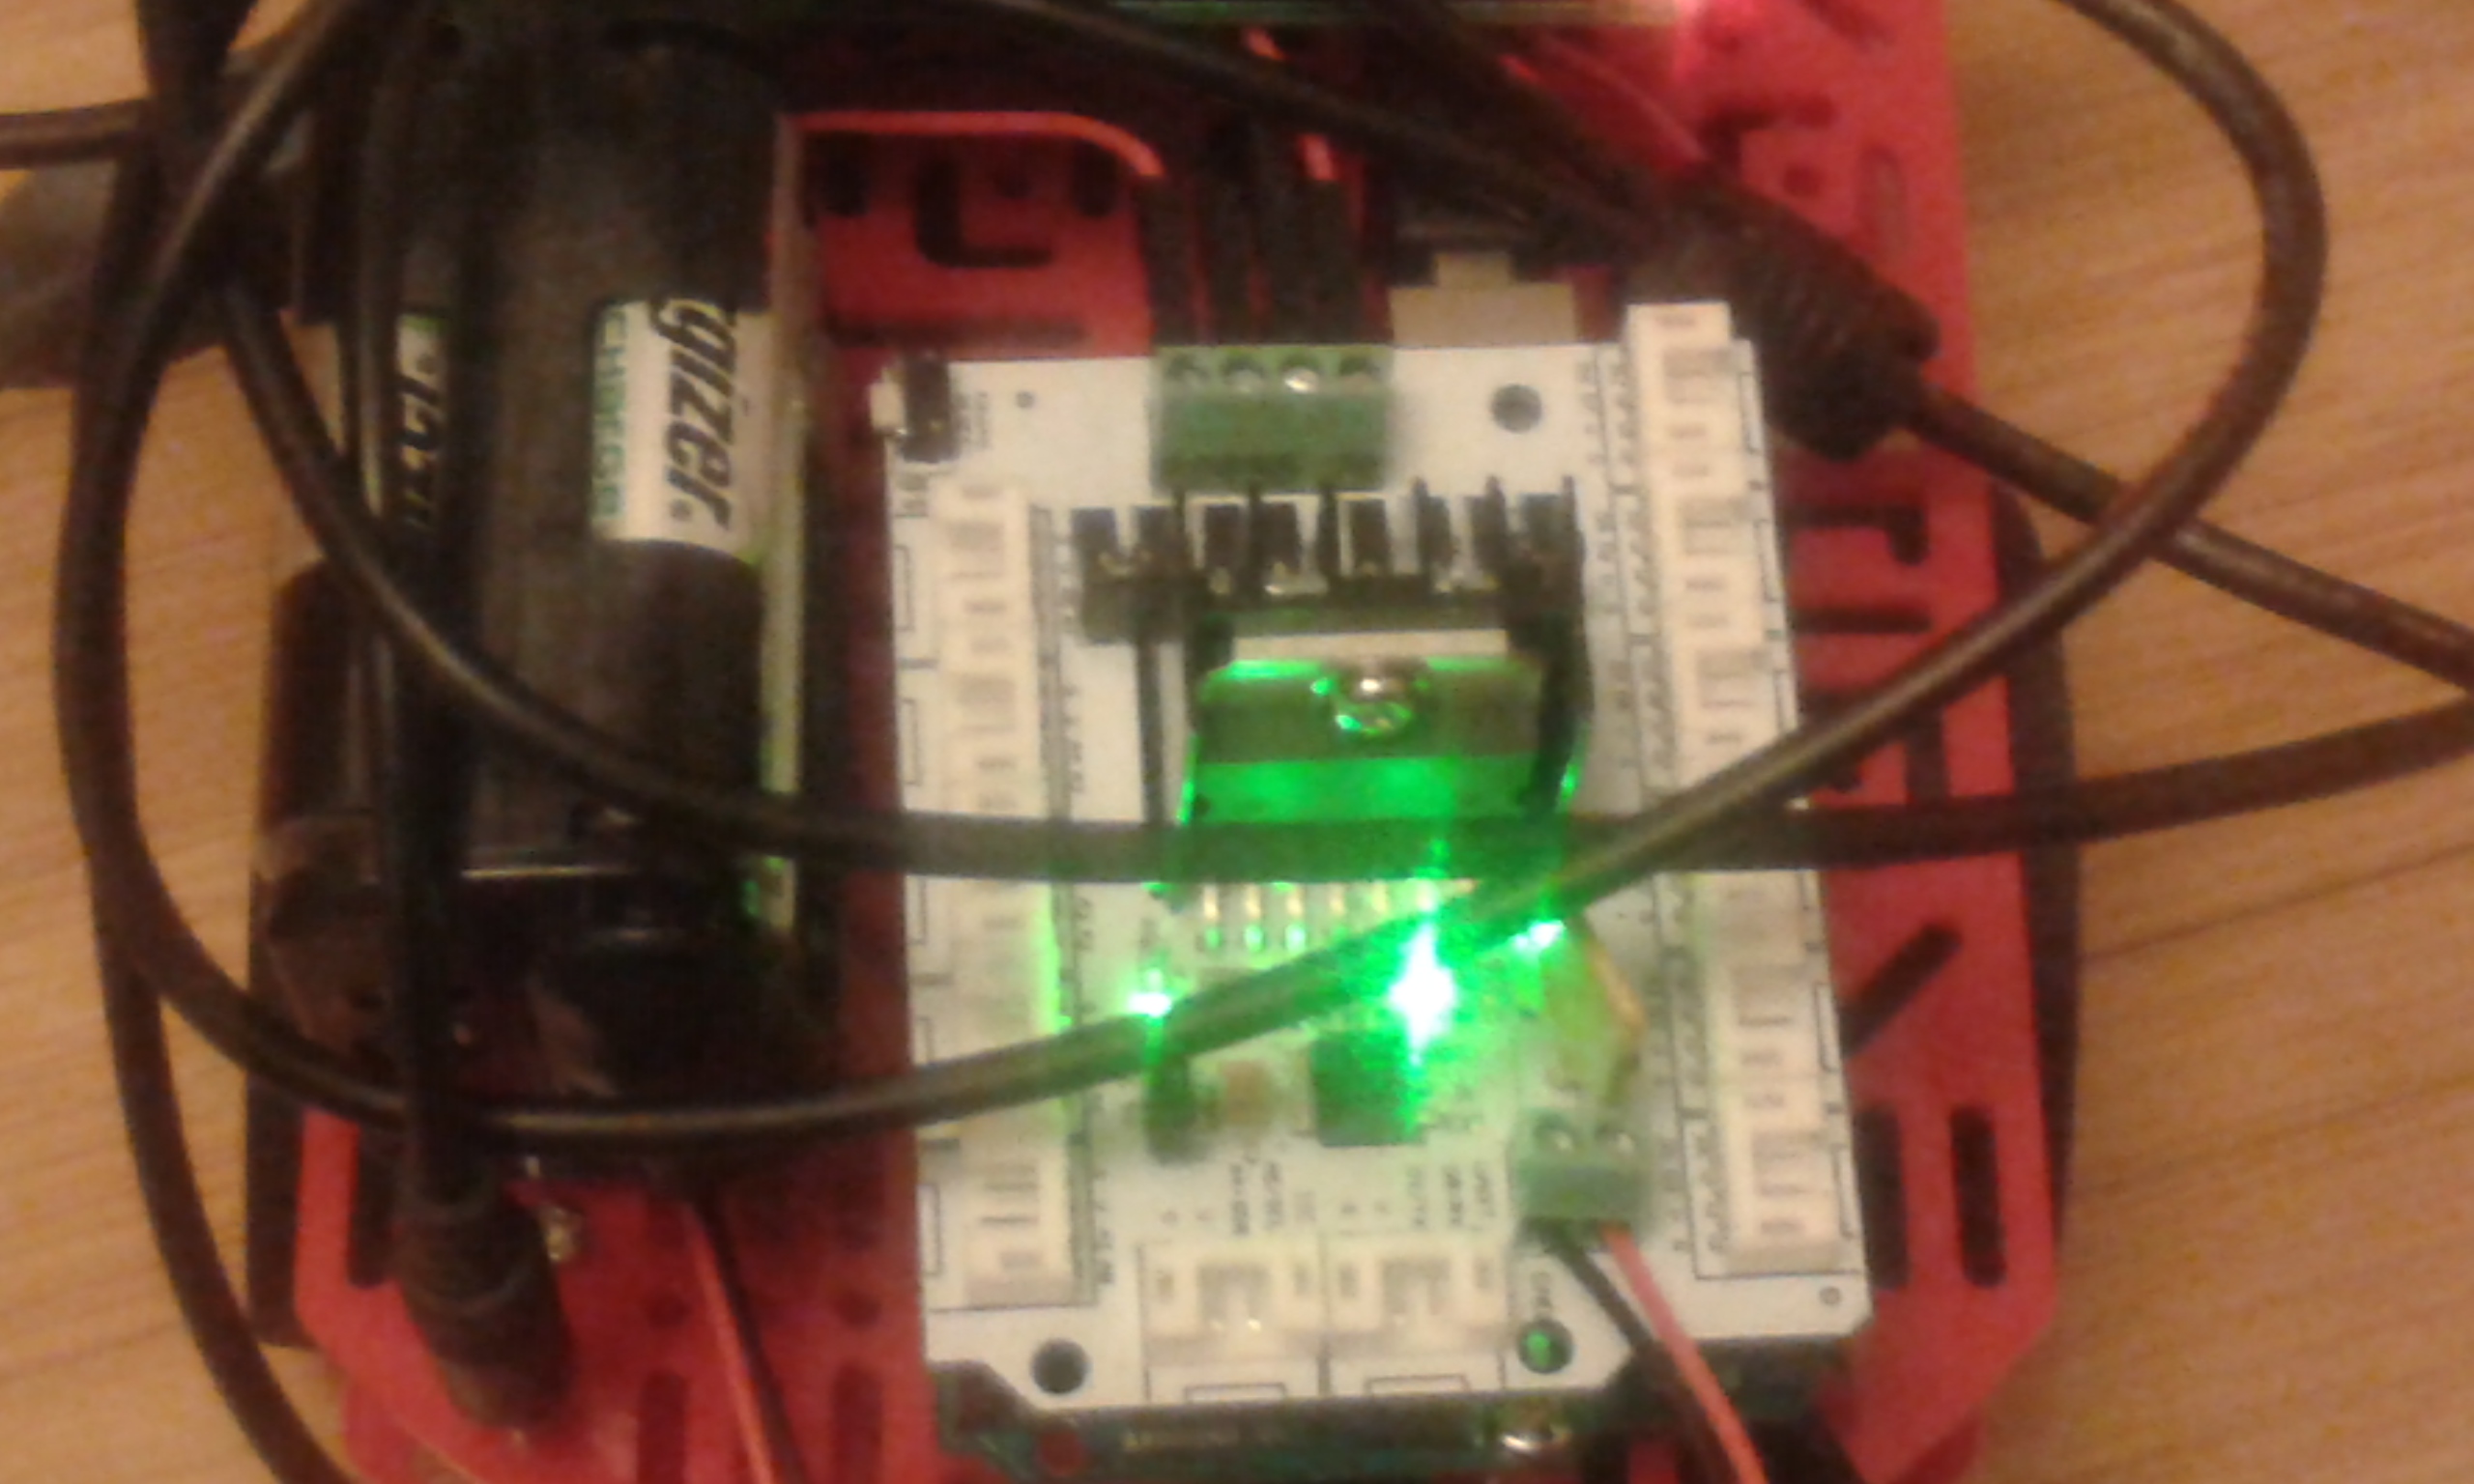 Top down view of Marco 2 showing motor shield with Arduino Uno board sitting underneath.